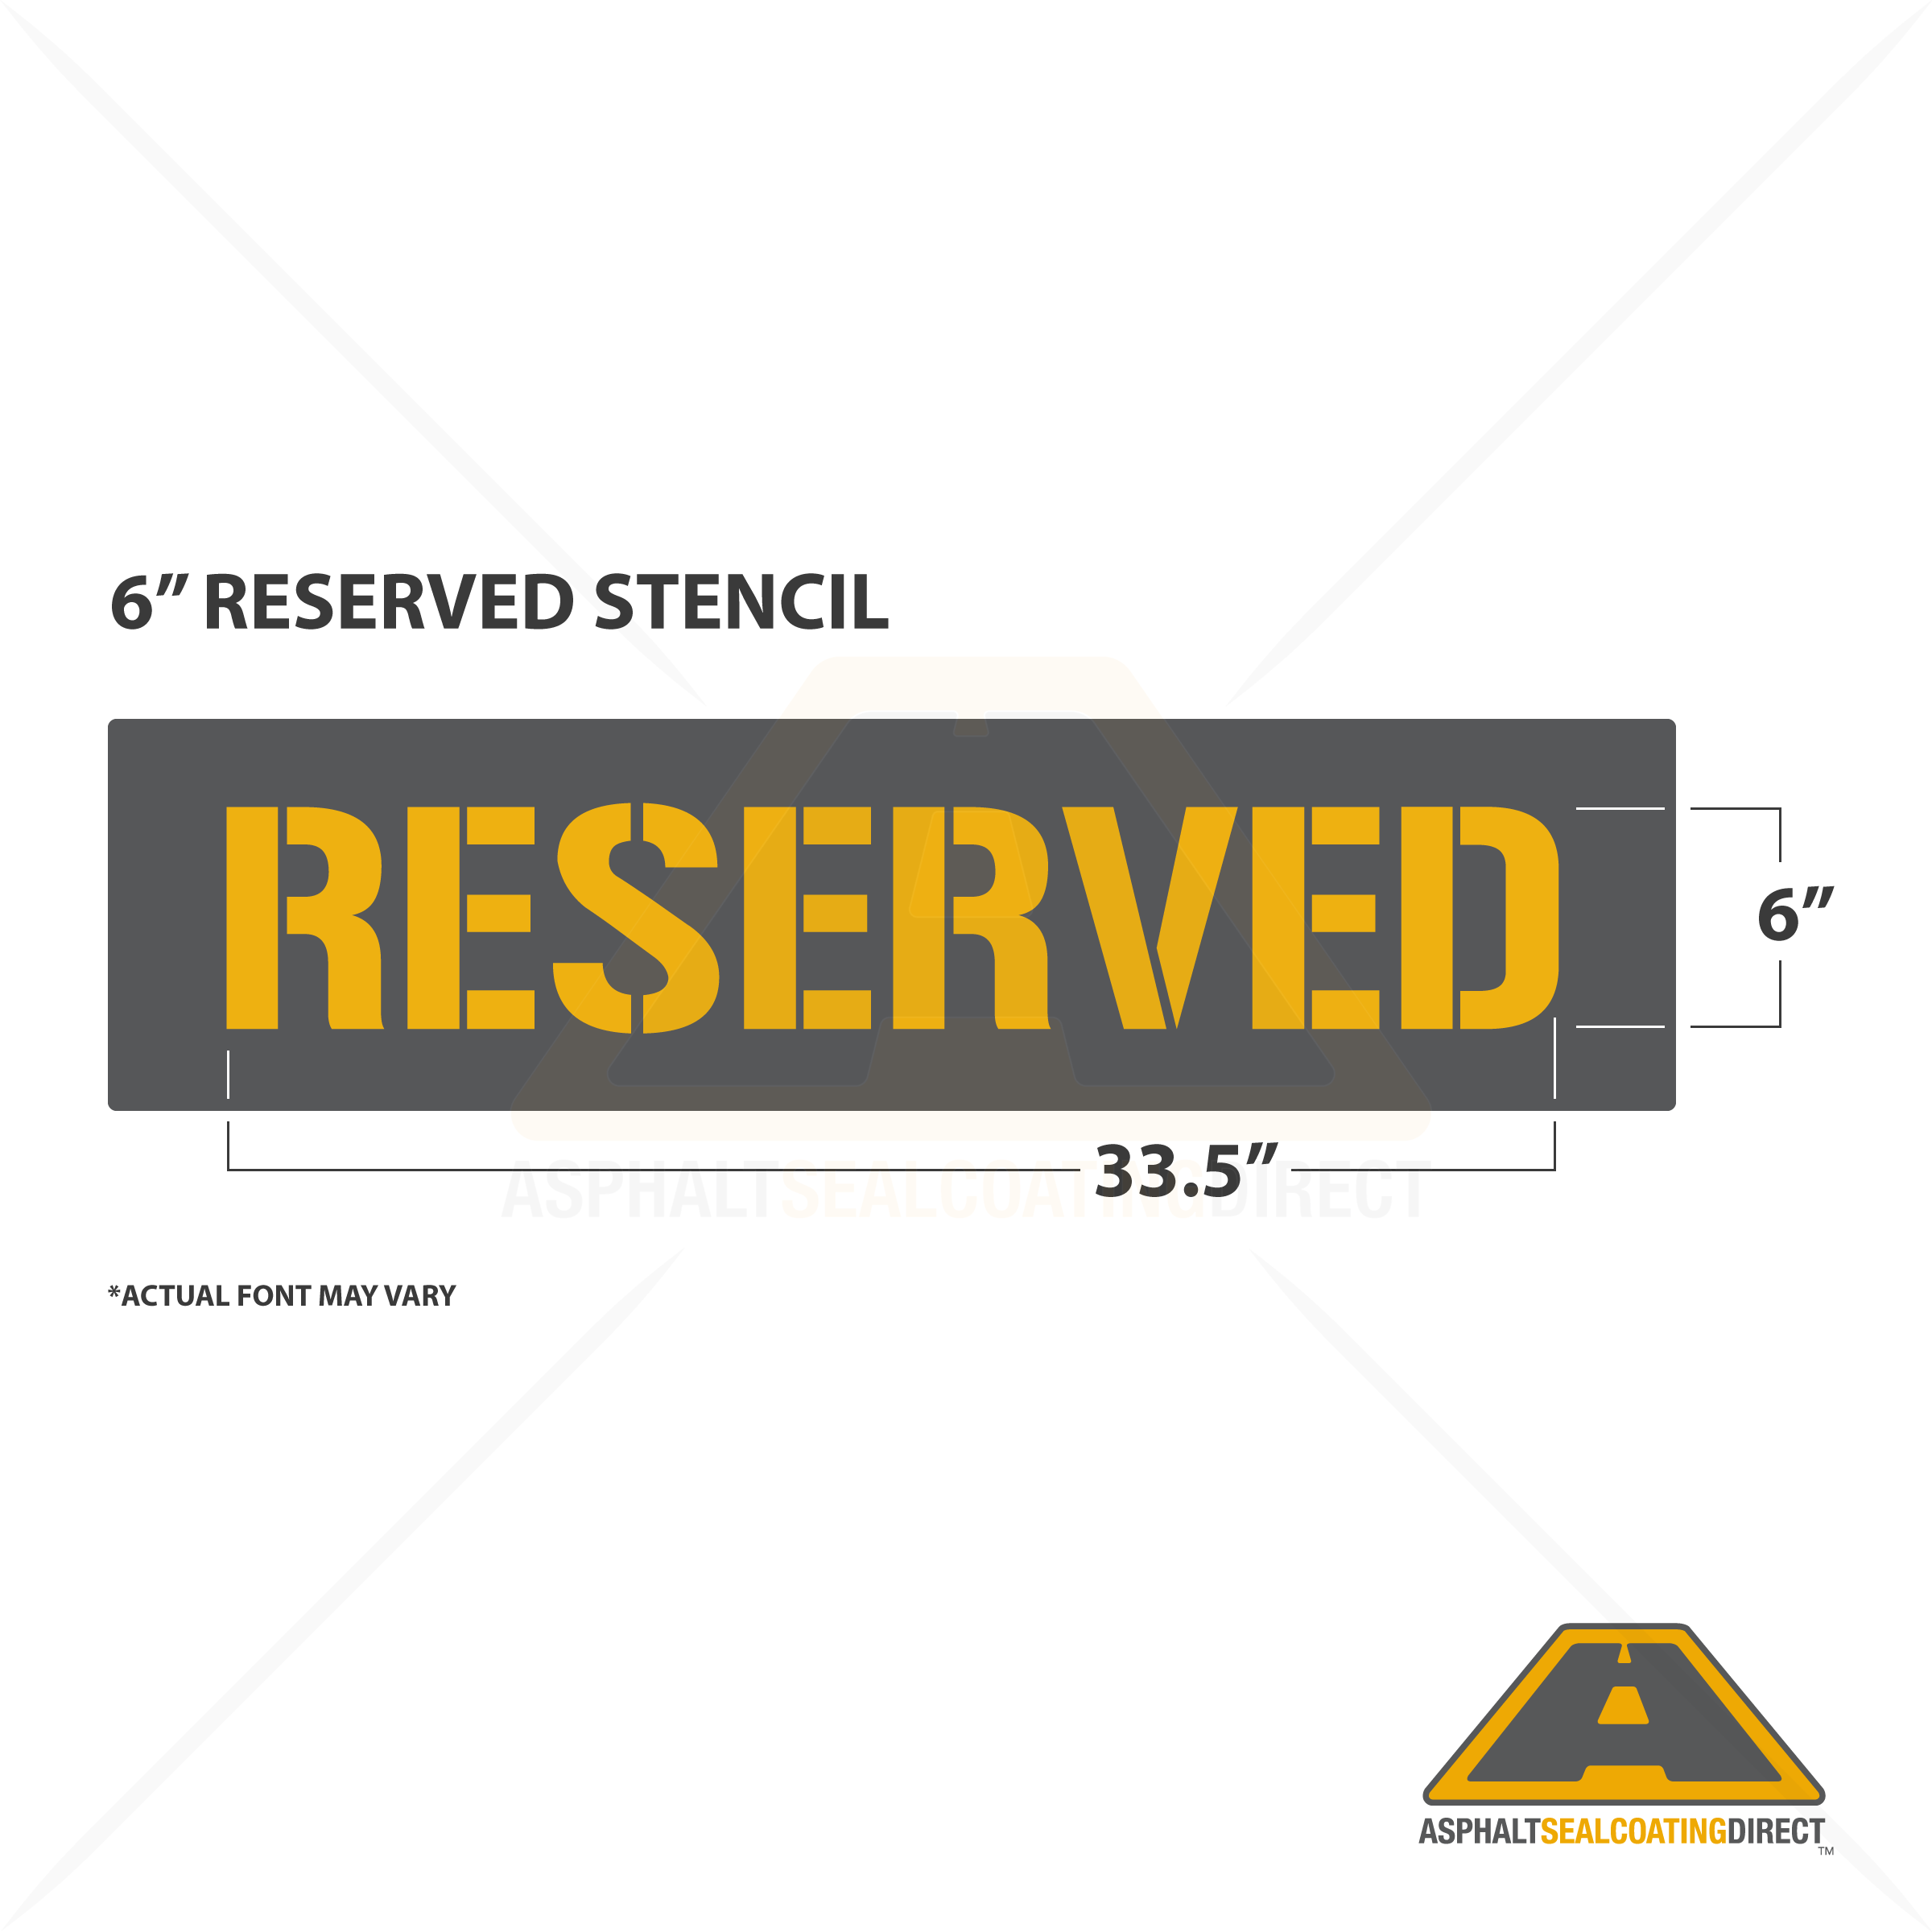 stencilease.com - 15% Off Parking Lot Stencils! Hurry, offer expires  8/24/20. Just use code: PARKINGLOT15 at checkout.